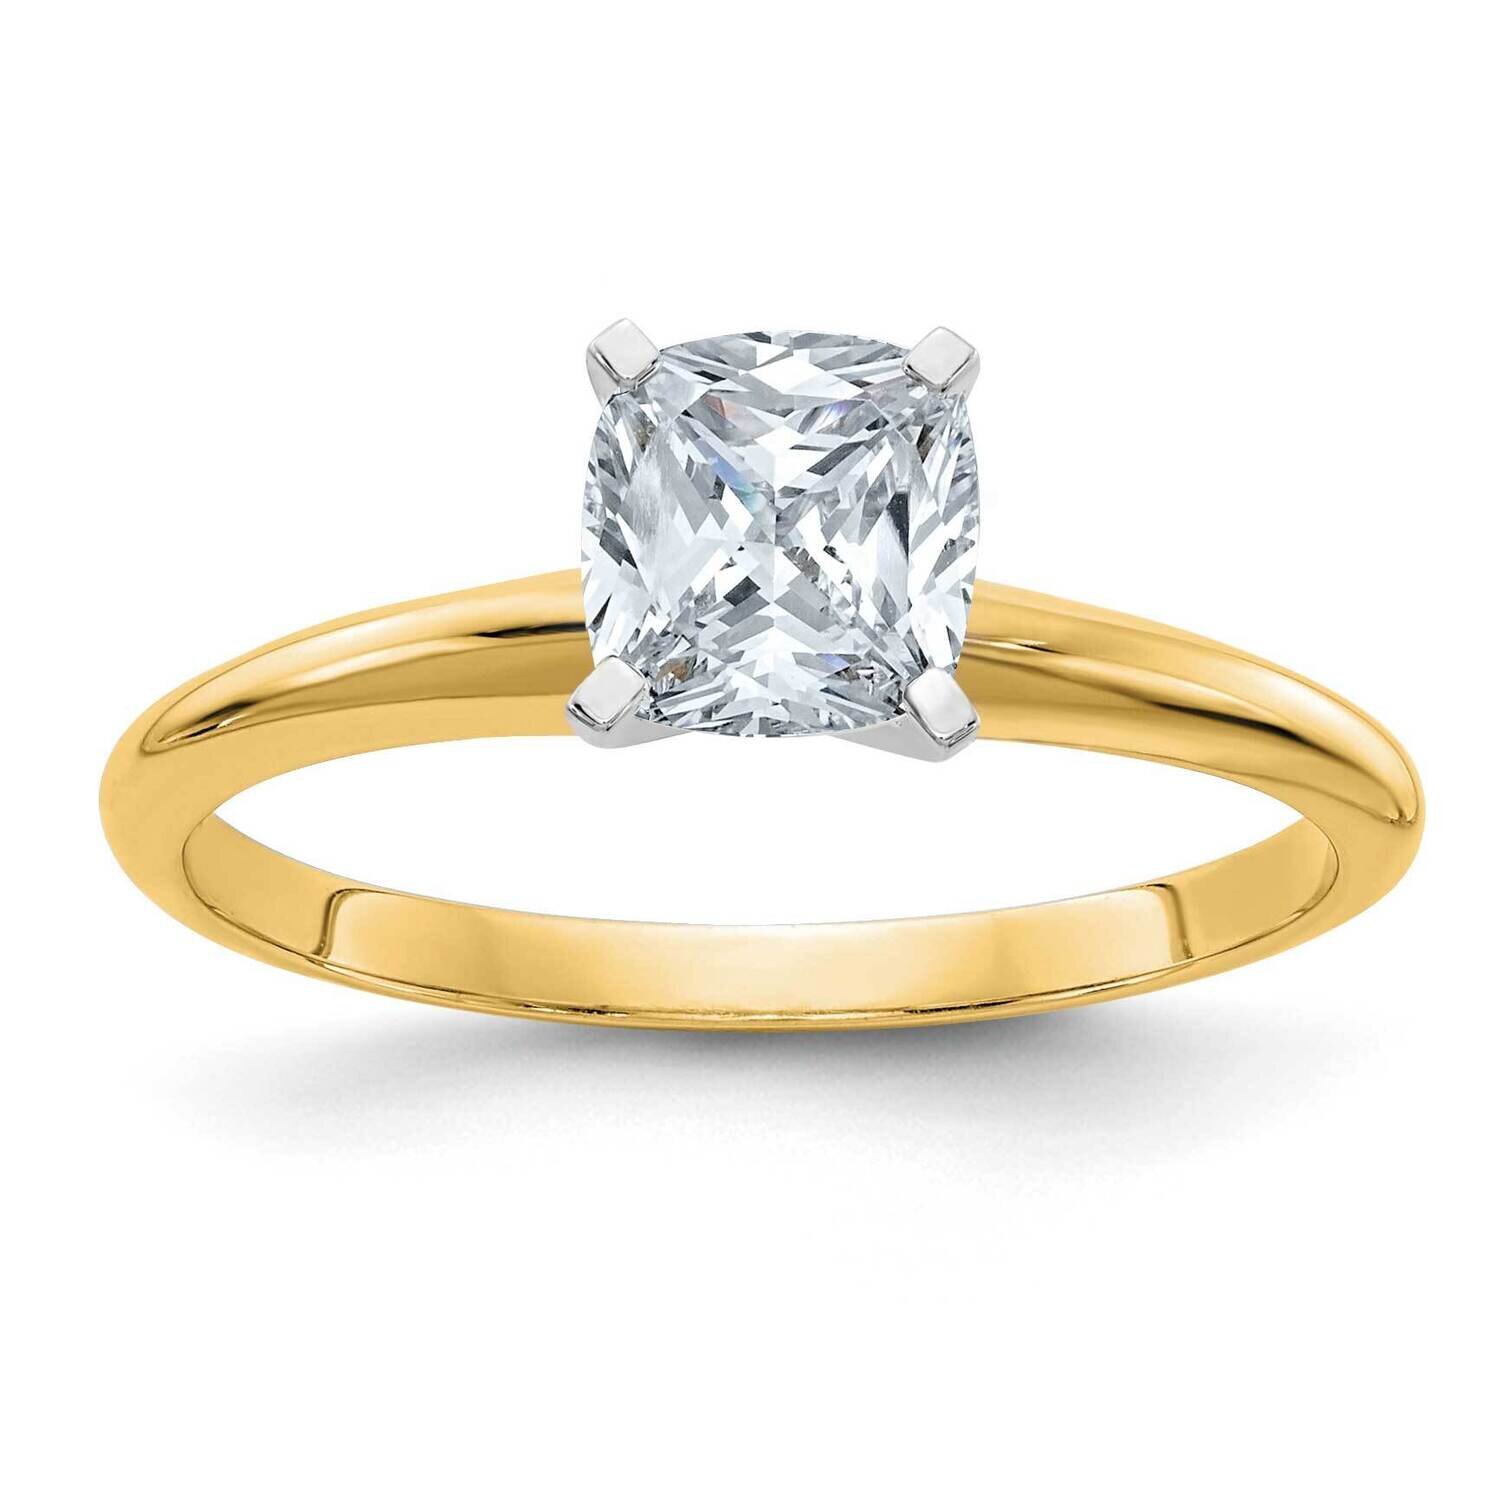 1ct. D E F Pure Light Cushion Moissanite Solitaire Ring 14k Gold YGSH13C-12MP-9